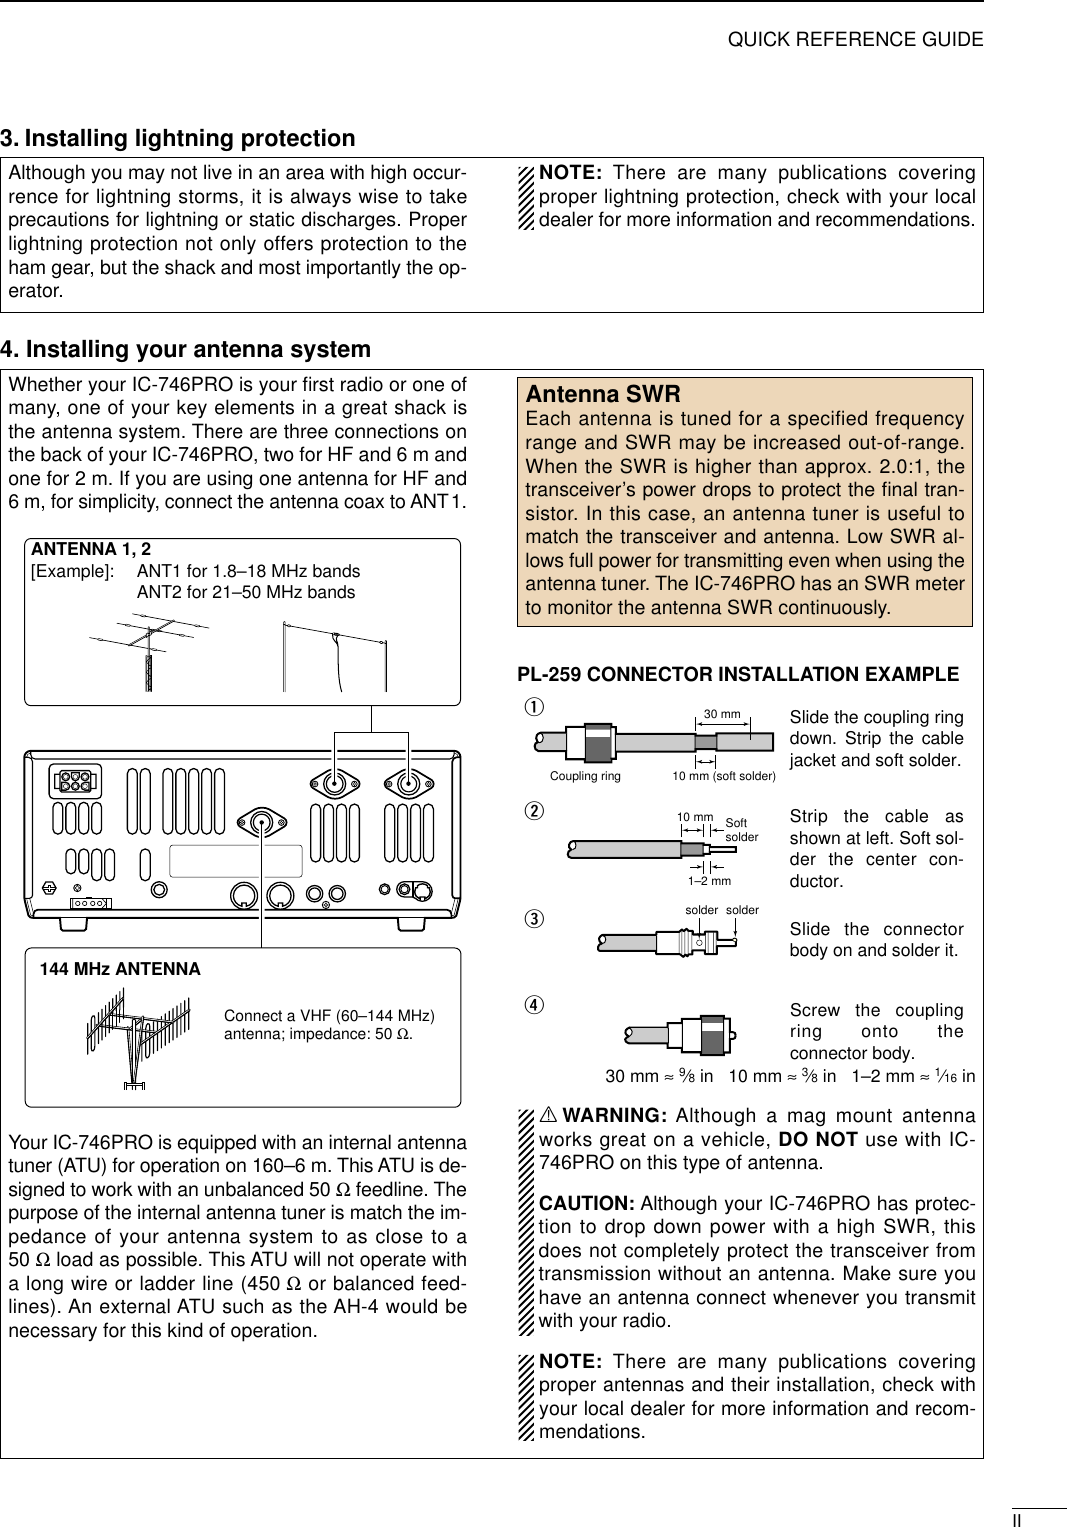 IIQUICK REFERENCE GUIDE3. Installing lightning protectionAlthough you may not live in an area with high occur-rence for lightning storms, it is always wise to takeprecautions for lightning or static discharges. Properlightning protection not only offers protection to theham gear, but the shack and most importantly the op-erator. NOTE: There are many publications coveringproper lightning protection, check with your localdealer for more information and recommendations.Whether your IC-746PRO is your ﬁrst radio or one ofmany, one of your key elements in a great shack isthe antenna system. There are three connections onthe back of your IC-746PRO, two for HF and 6 m andone for 2 m. If you are using one antenna for HF and6 m, for simplicity, connect the antenna coax to ANT1.Your IC-746PRO is equipped with an internal antennatuner (ATU) for operation on 160–6 m. This ATU is de-signed to work with an unbalanced 50 Ωfeedline. Thepurpose of the internal antenna tuner is match the im-pedance of your antenna system to as close to a50 Ωload as possible. This ATU will not operate witha long wire or ladder line (450 Ωor balanced feed-lines). An external ATU such as the AH-4 would benecessary for this kind of operation.PL-259 CONNECTOR INSTALLATION EXAMPLE30 mm ≈9⁄8in   10 mm ≈3⁄8in   1–2 mm ≈1⁄16 inRWARNING: Although a mag mount antennaworks great on a vehicle, DO NOT use with IC-746PRO on this type of antenna. CAUTION: Although your IC-746PRO has protec-tion to drop down power with a high SWR, thisdoes not completely protect the transceiver fromtransmission without an antenna. Make sure youhave an antenna connect whenever you transmitwith your radio. NOTE: There are many publications coveringproper antennas and their installation, check withyour local dealer for more information and recom-mendations.30 mm10 mm (soft solder)10 mm1–2 mmsolder solderSoftsolderCoupling ringSlide the coupling ring down. Strip the cable jacket and soft solder.Slide the connector body on and solder it.Screw the coupling ring onto the connector body.Strip the cable as shown at left. Soft sol-der the center con-ductor.qwerAntenna SWREach antenna is tuned for a specified frequencyrange and SWR may be increased out-of-range.When the SWR is higher than approx. 2.0:1, thetransceiver’s power drops to protect the ﬁnal tran-sistor. In this case, an antenna tuner is useful tomatch the transceiver and antenna. Low SWR al-lows full power for transmitting even when using theantenna tuner. The IC-746PRO has an SWR meterto monitor the antenna SWR continuously.ANTENNA 1, 2[Example]: ANT1 for 1.8–18 MHz bandsANT2 for 21–50 MHz bands144 MHz ANTENNAConnect a VHF (60–144 MHz)antenna; impedance: 50 Ω.4. Installing your antenna system